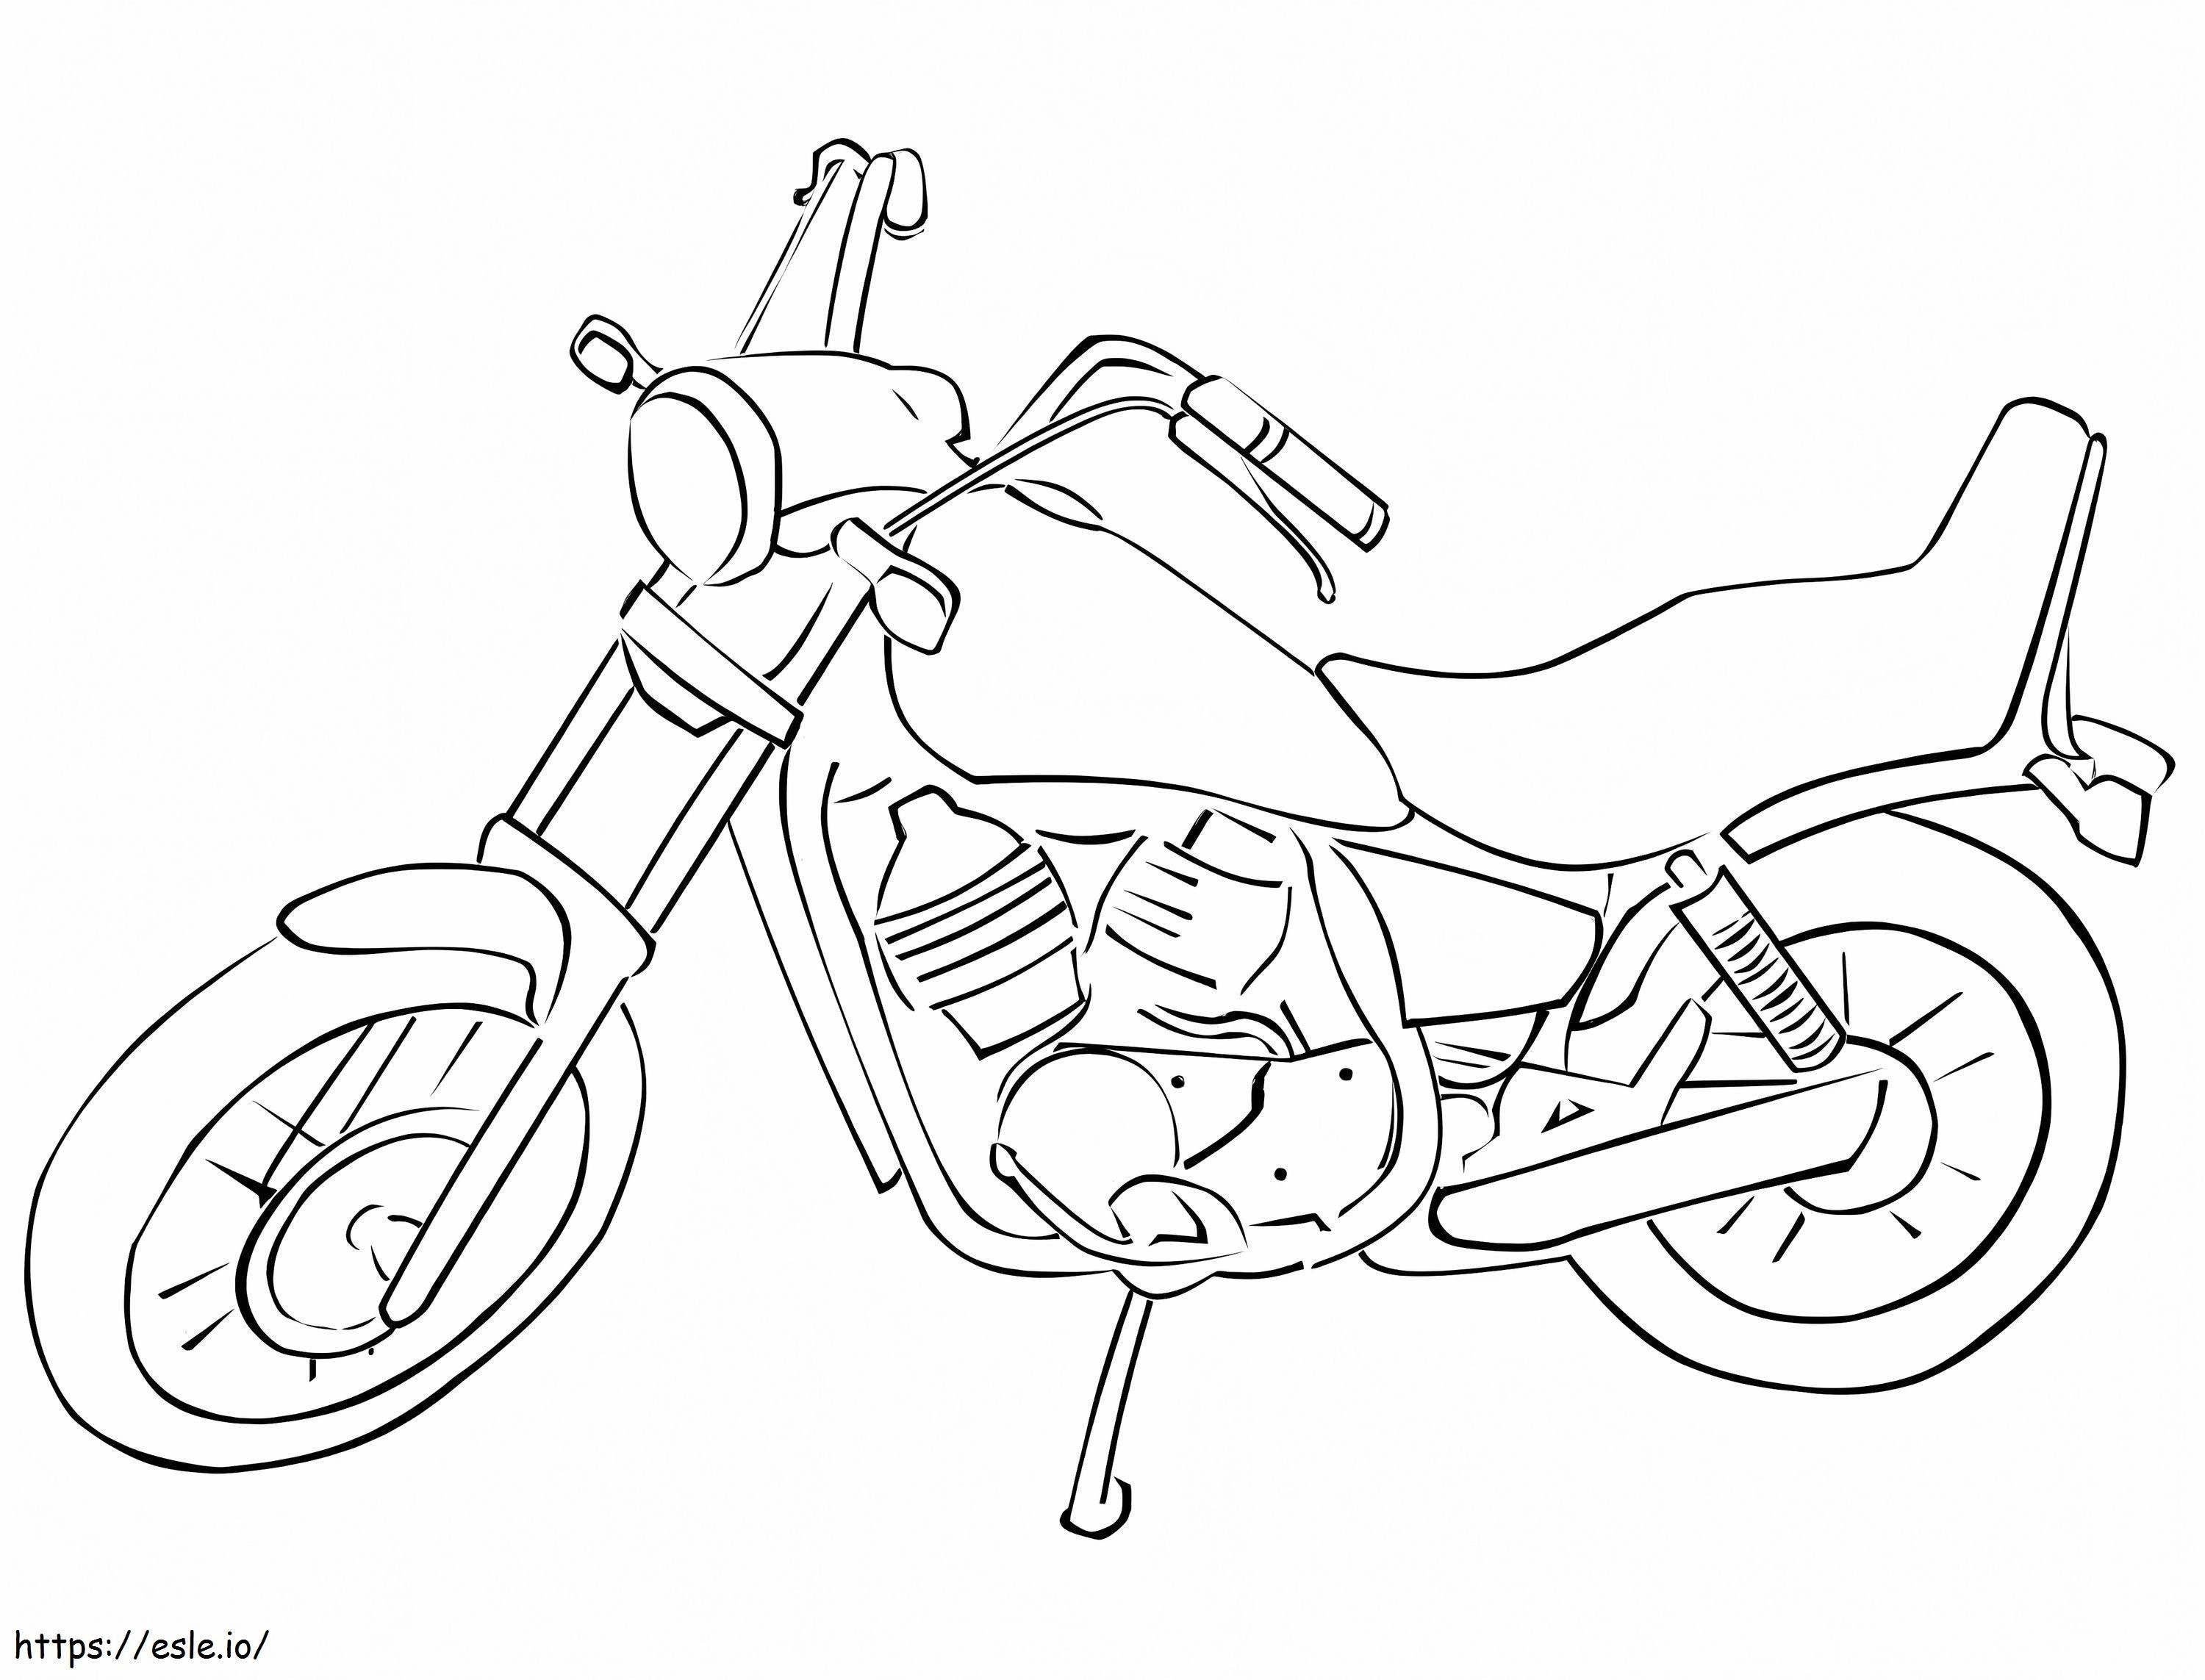 Motorcycle coloring page